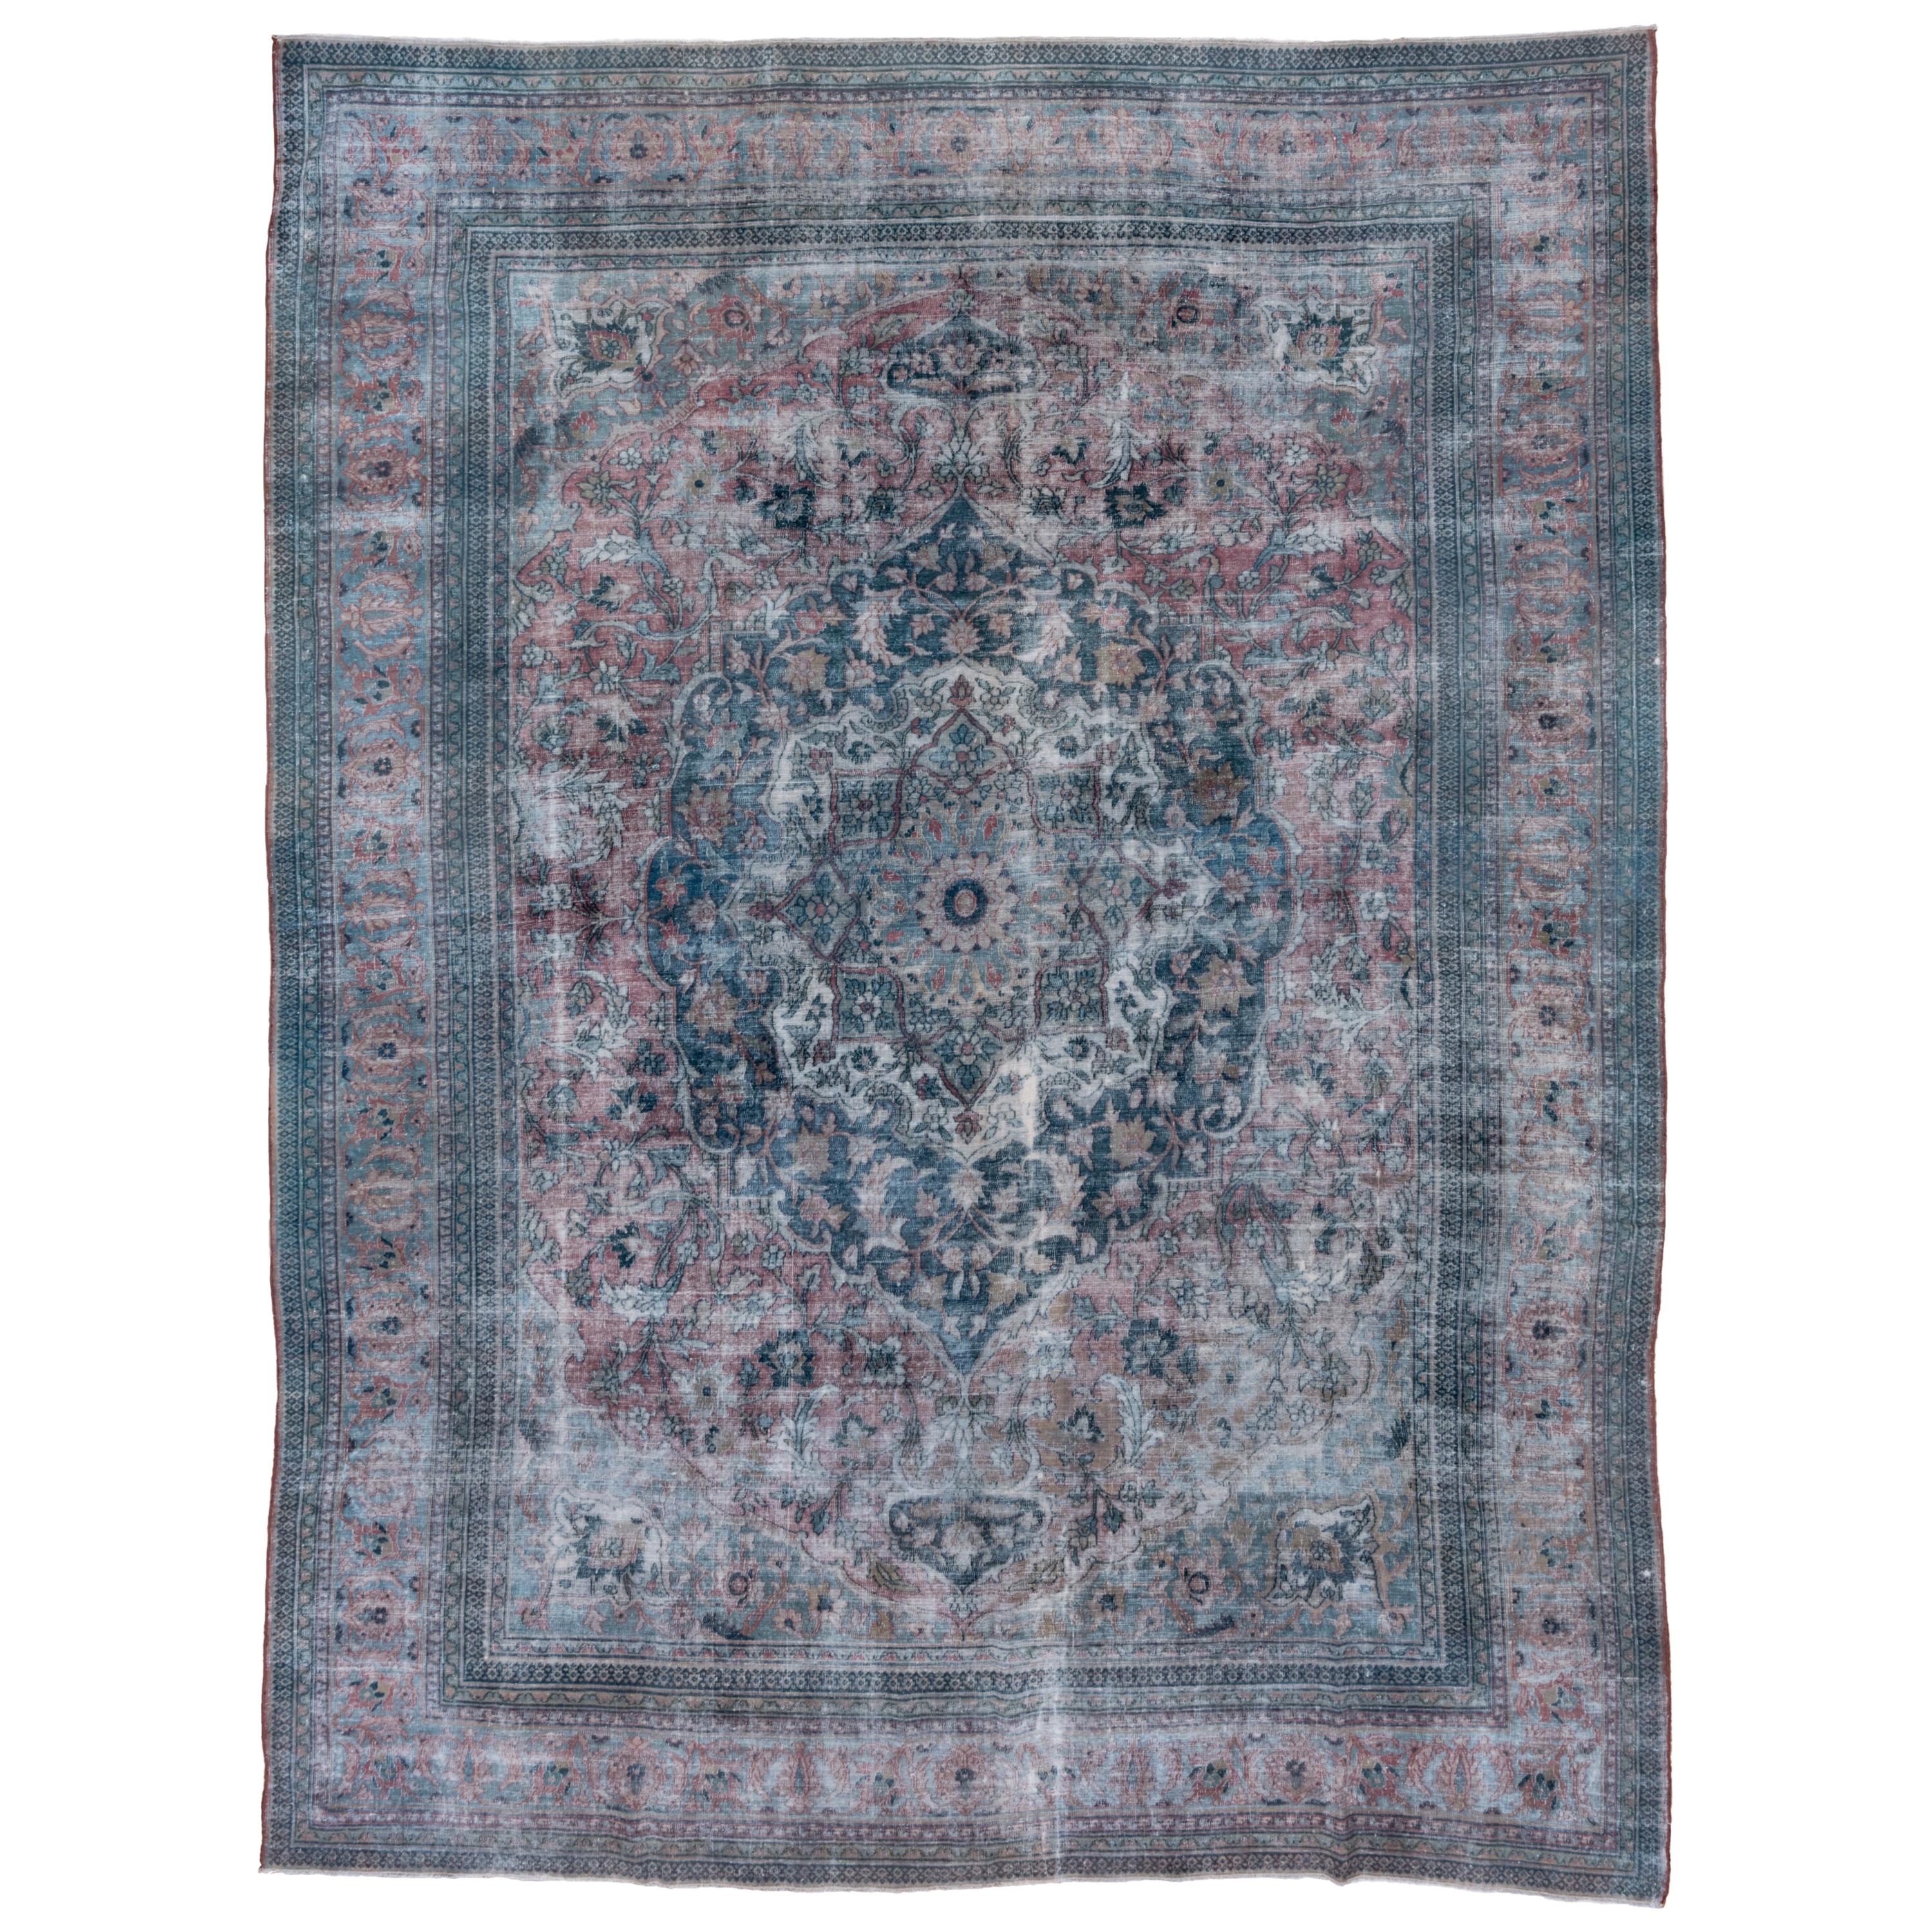 Shabby Chic Antique Persian Khorassan Rug, Blue & Pink Palette, Circa 1920s For Sale